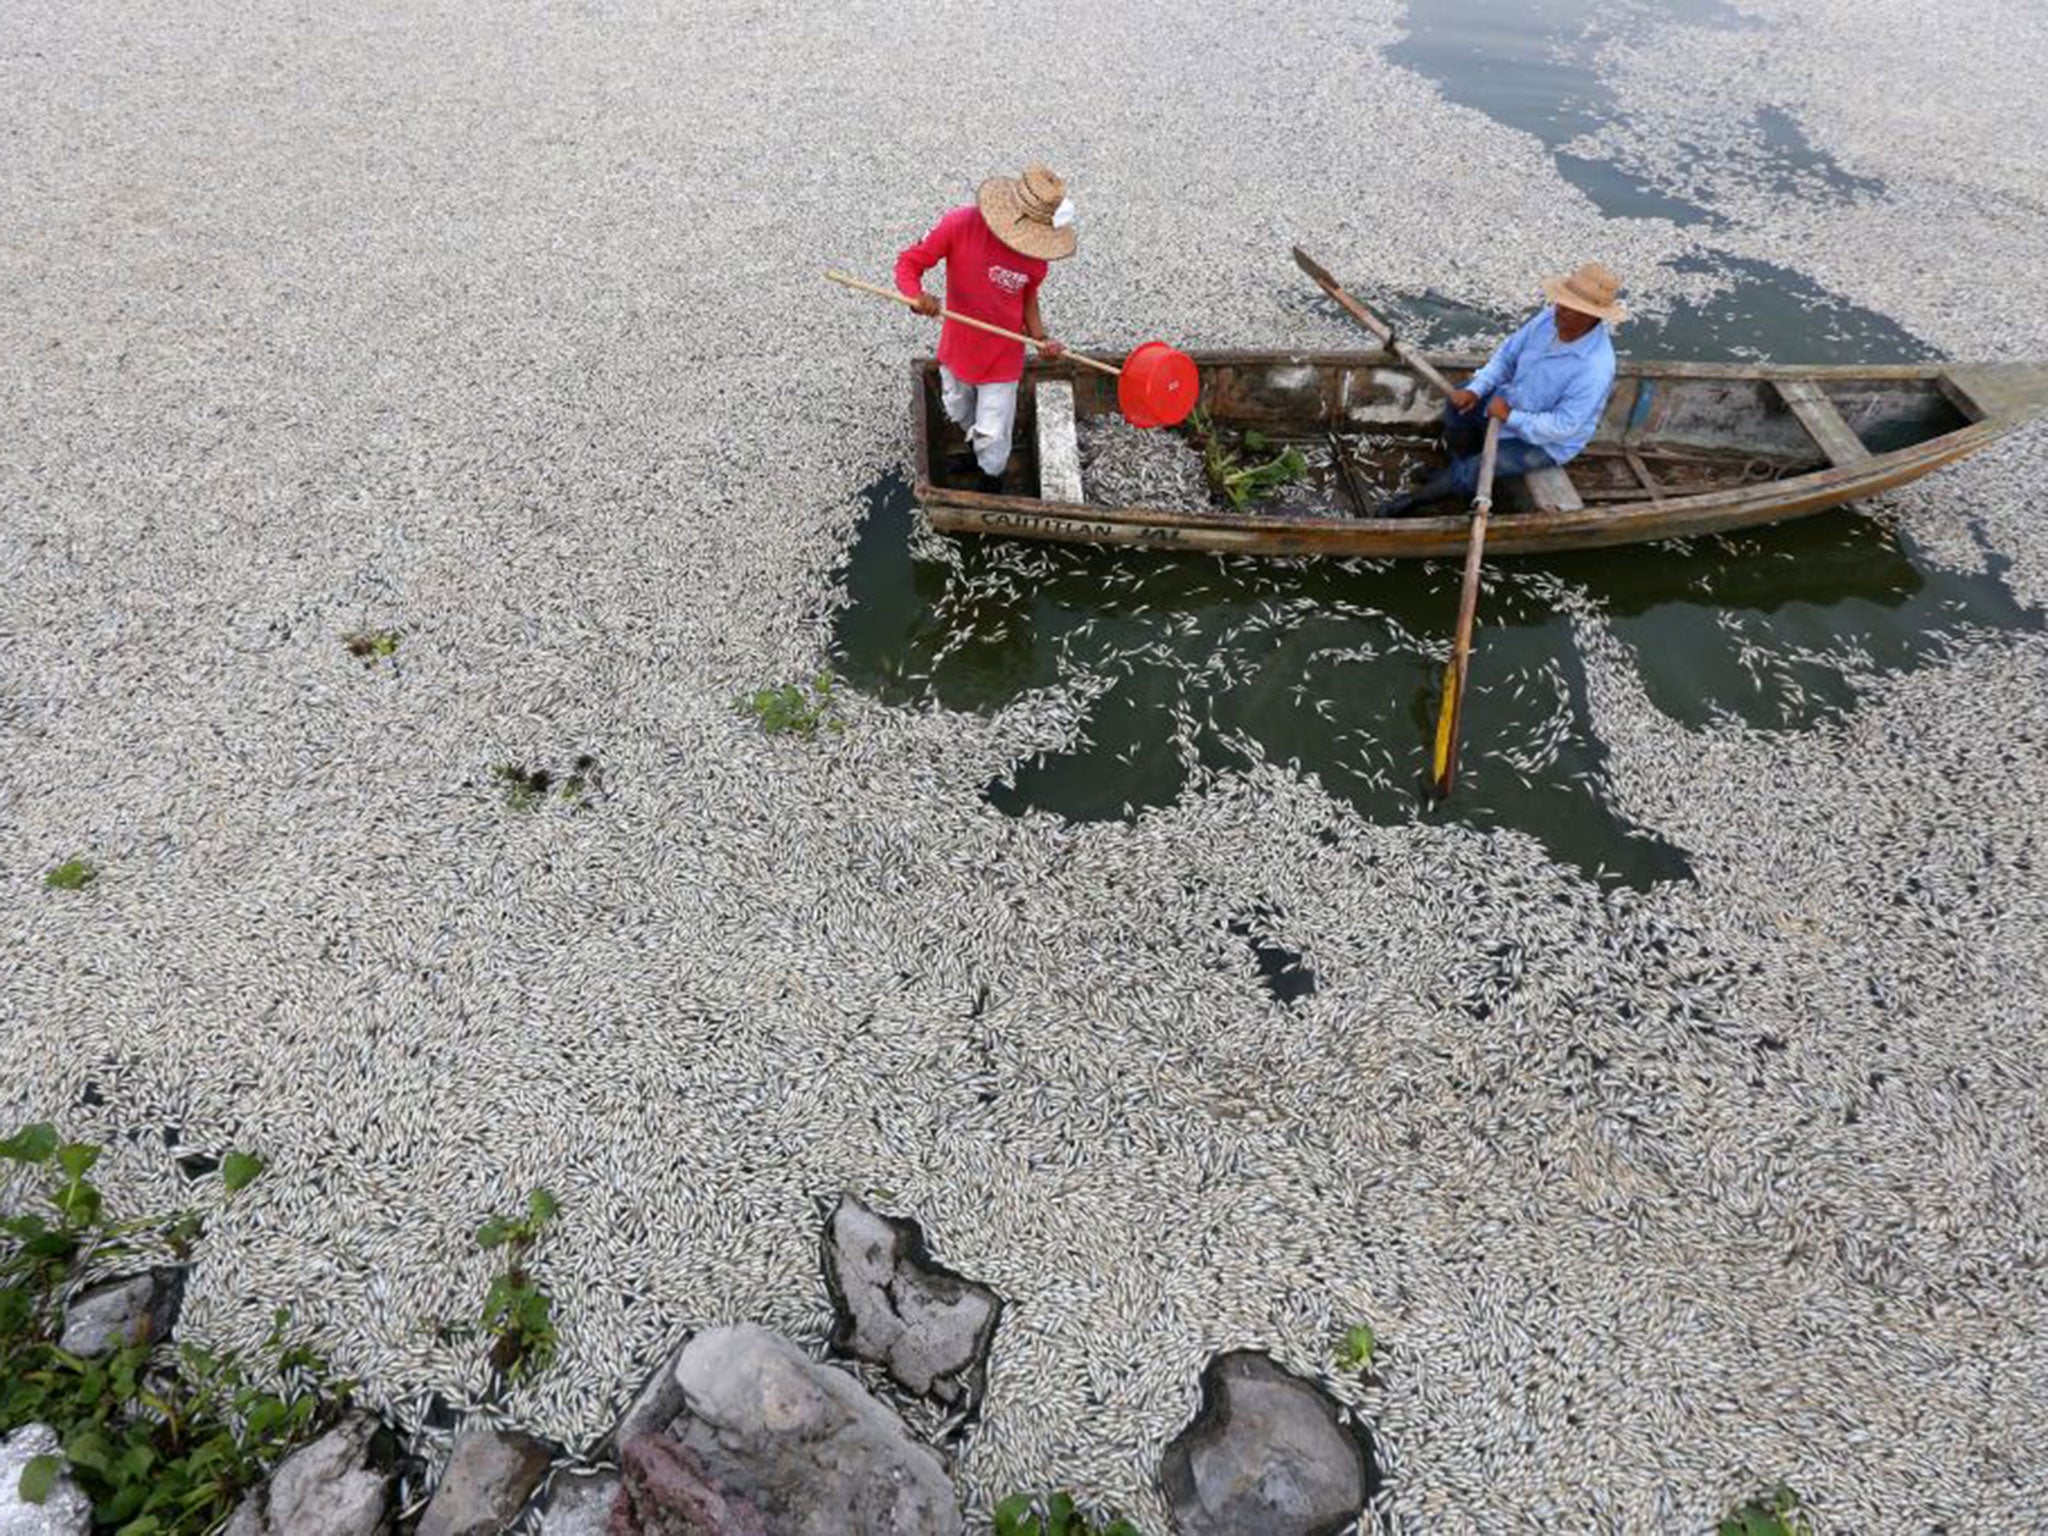 Hundreds of thousands of dead fish appeared in Cajititlán Lake in the west of Mexico over the weekend